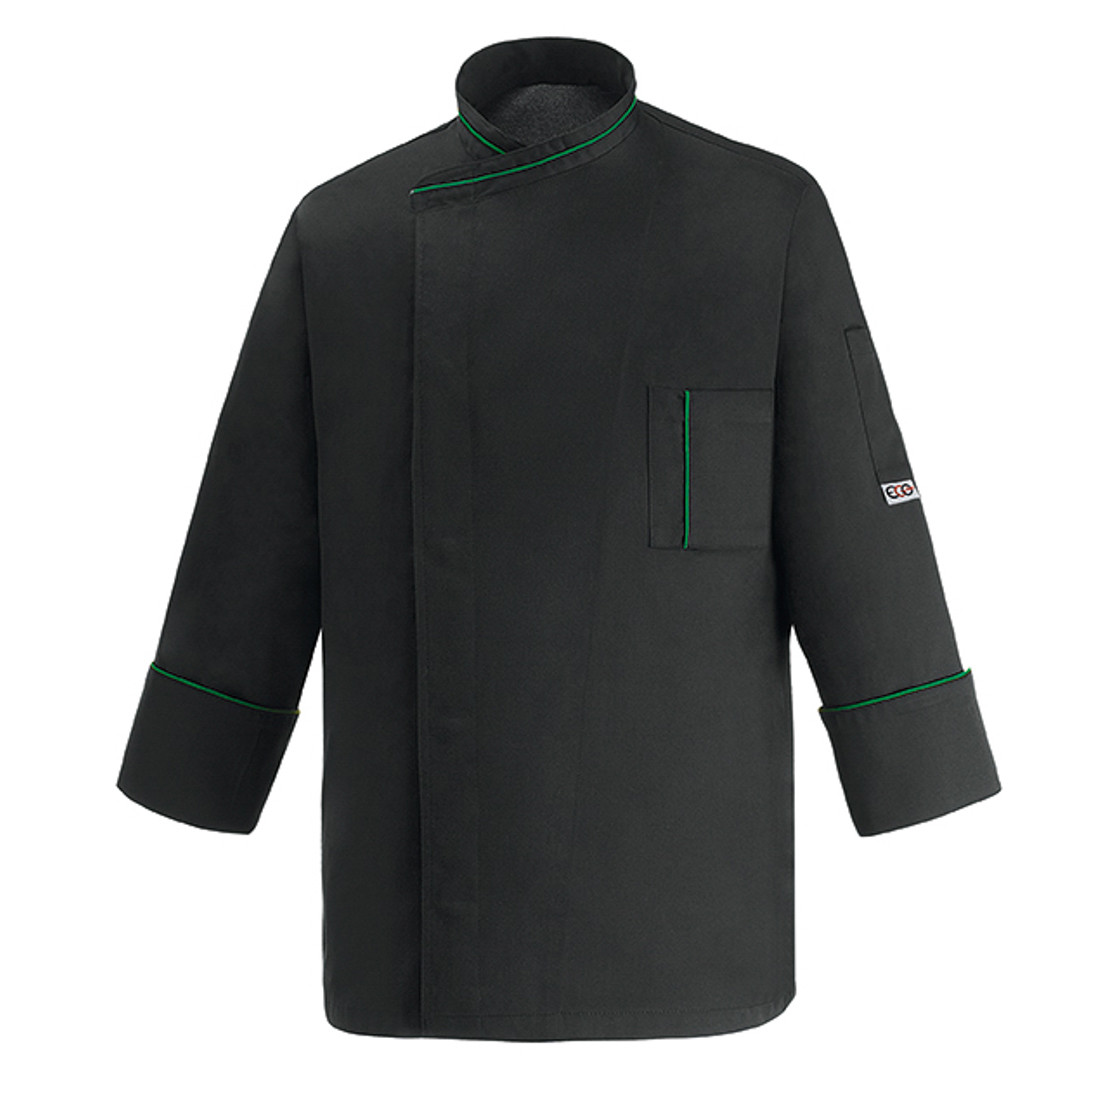 Microtec Chef's Jacket, LS - Safetywear